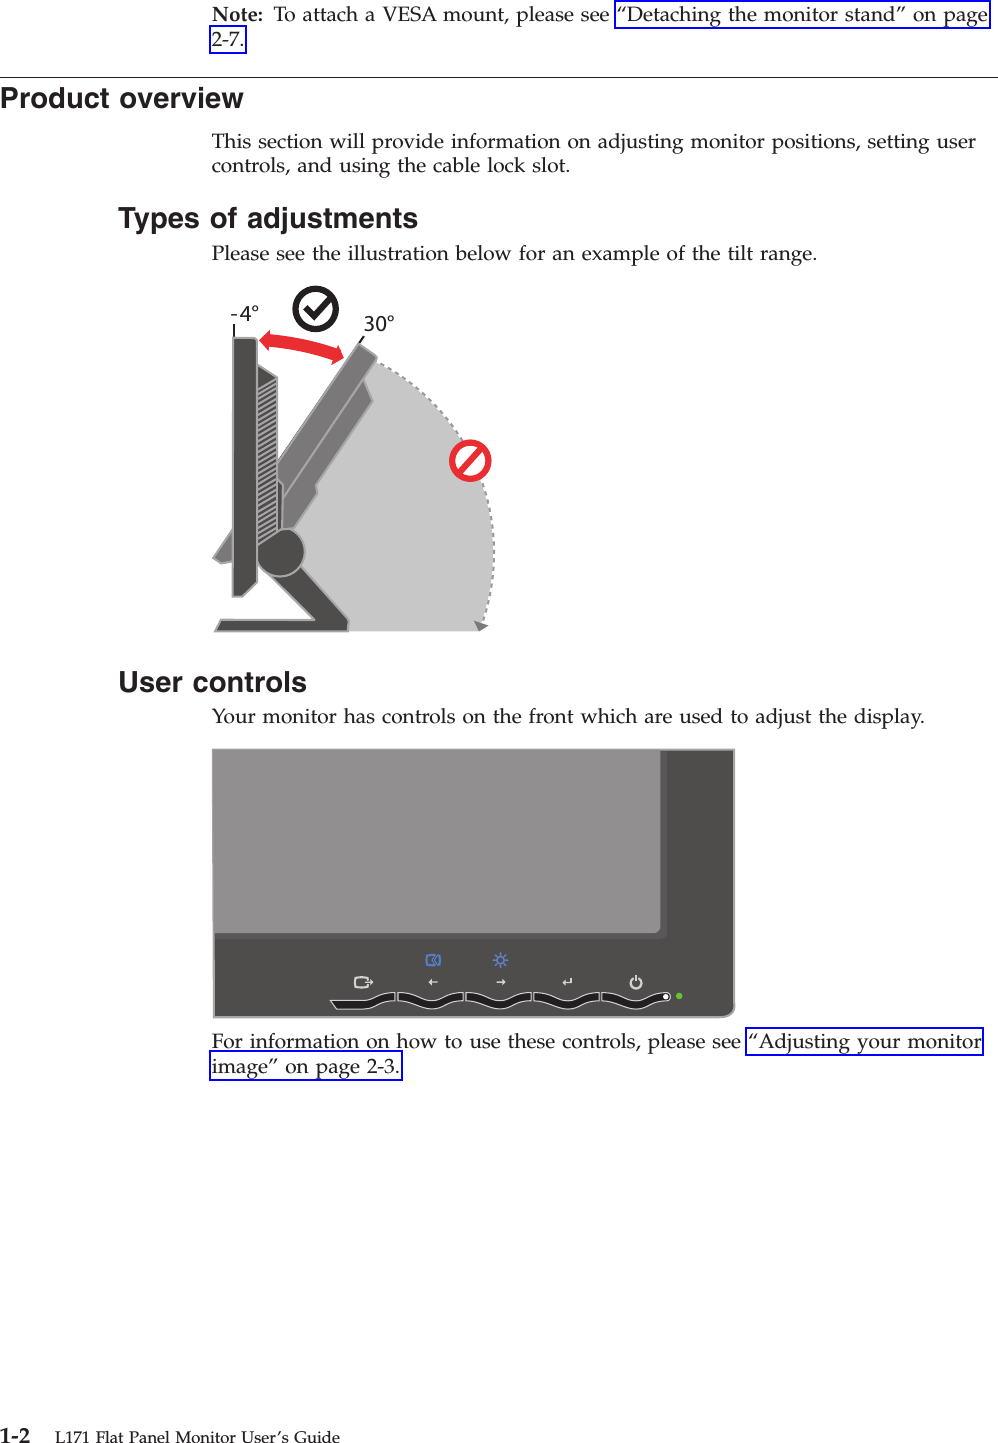 Note: To attach a VESA mount, please see “Detaching the monitor stand” on page 2-7. Product overview This section will provide information on adjusting monitor positions, setting user controls, and using the cable lock slot. Types of adjustments Please see the illustration below for an example of the tilt range. -4° 30°   User controls Your monitor has controls on the front which are used to adjust the display.    For information on how to use these controls, please see “Adjusting your monitor image” on page 2-3.  1-2 L171 Flat Panel Monitor User’s Guide